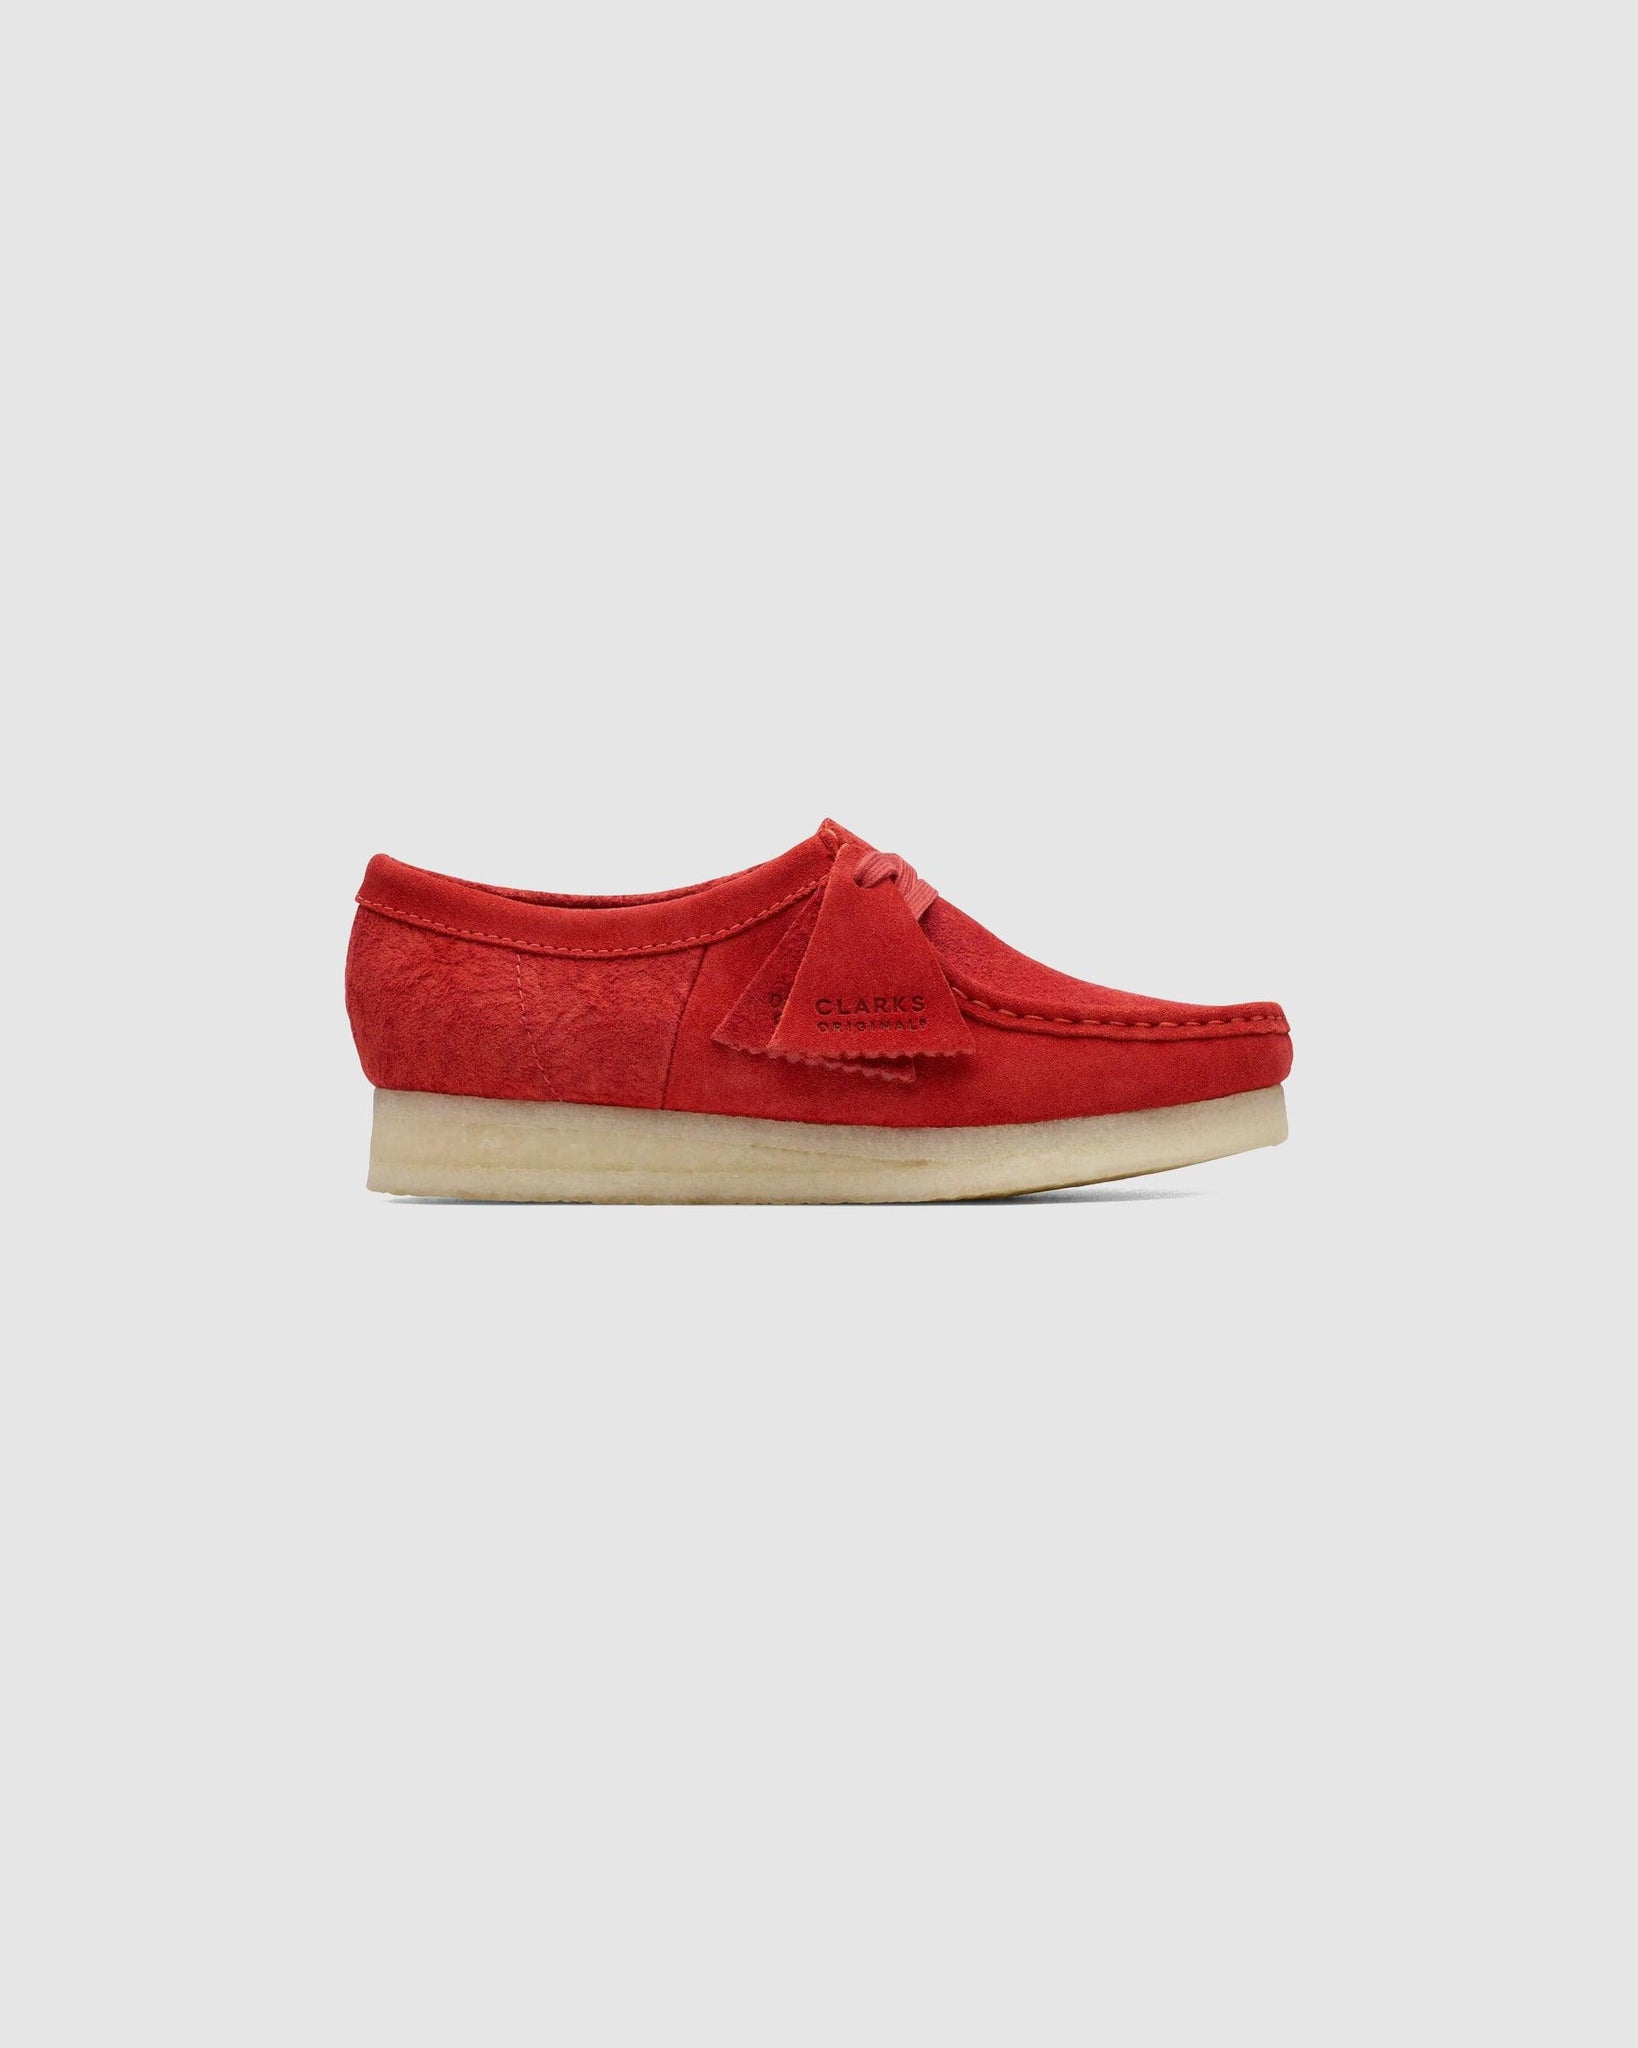 x Clarks Originals Wallabee Red - {{ collection.title }} - Chinatown Country Club 